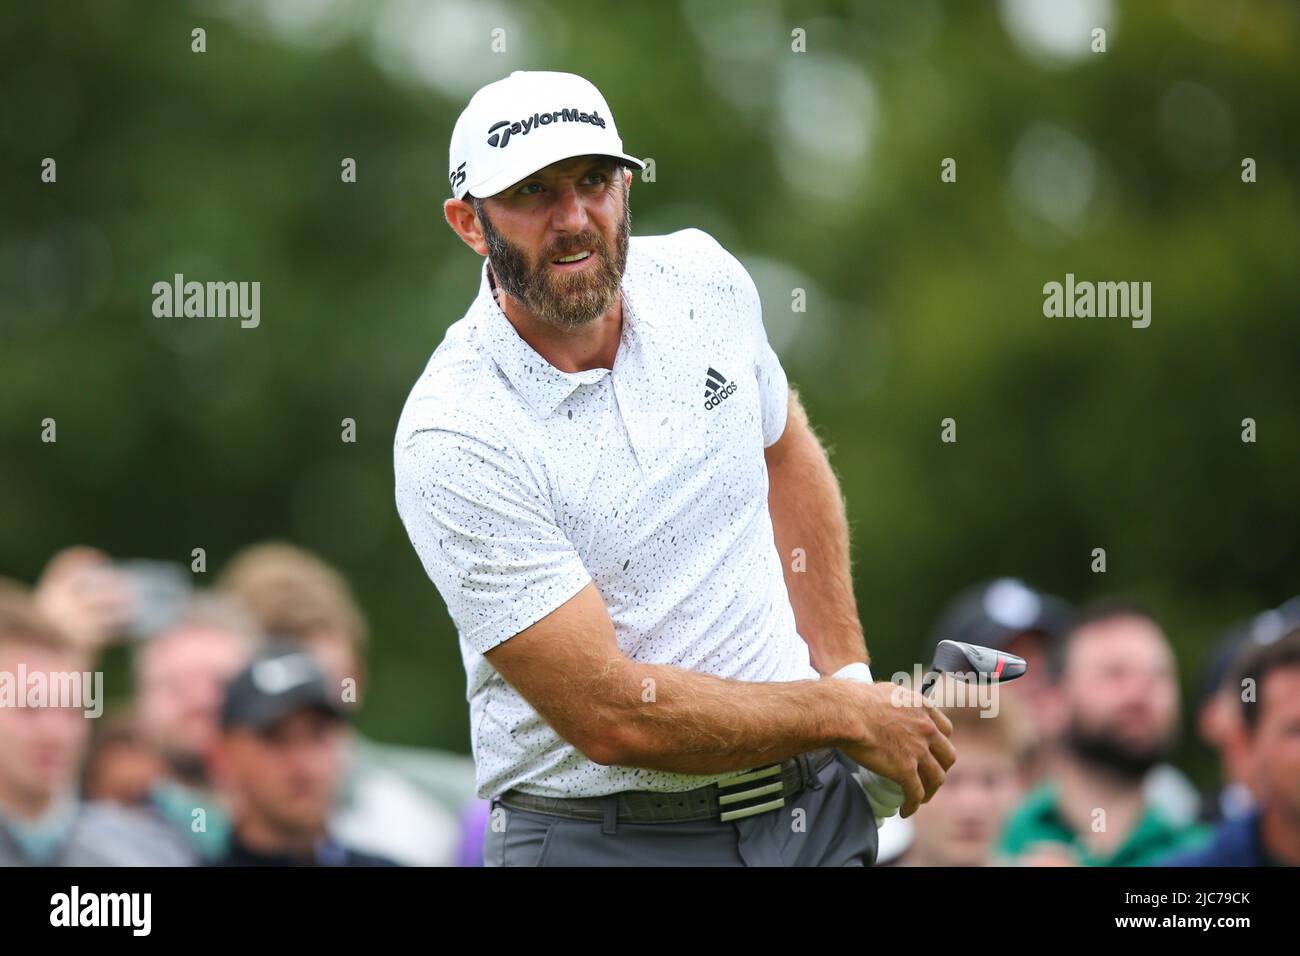 ST ALBANS, ENGLAND - JUNE 09: Dustin Johnson of the United States follows his tee shot on the 10th hole during day one of the LIV Golf Invitational at The Centurion Club on June 9, 2022 in St Albans, England. (MB Media) Stock Photo